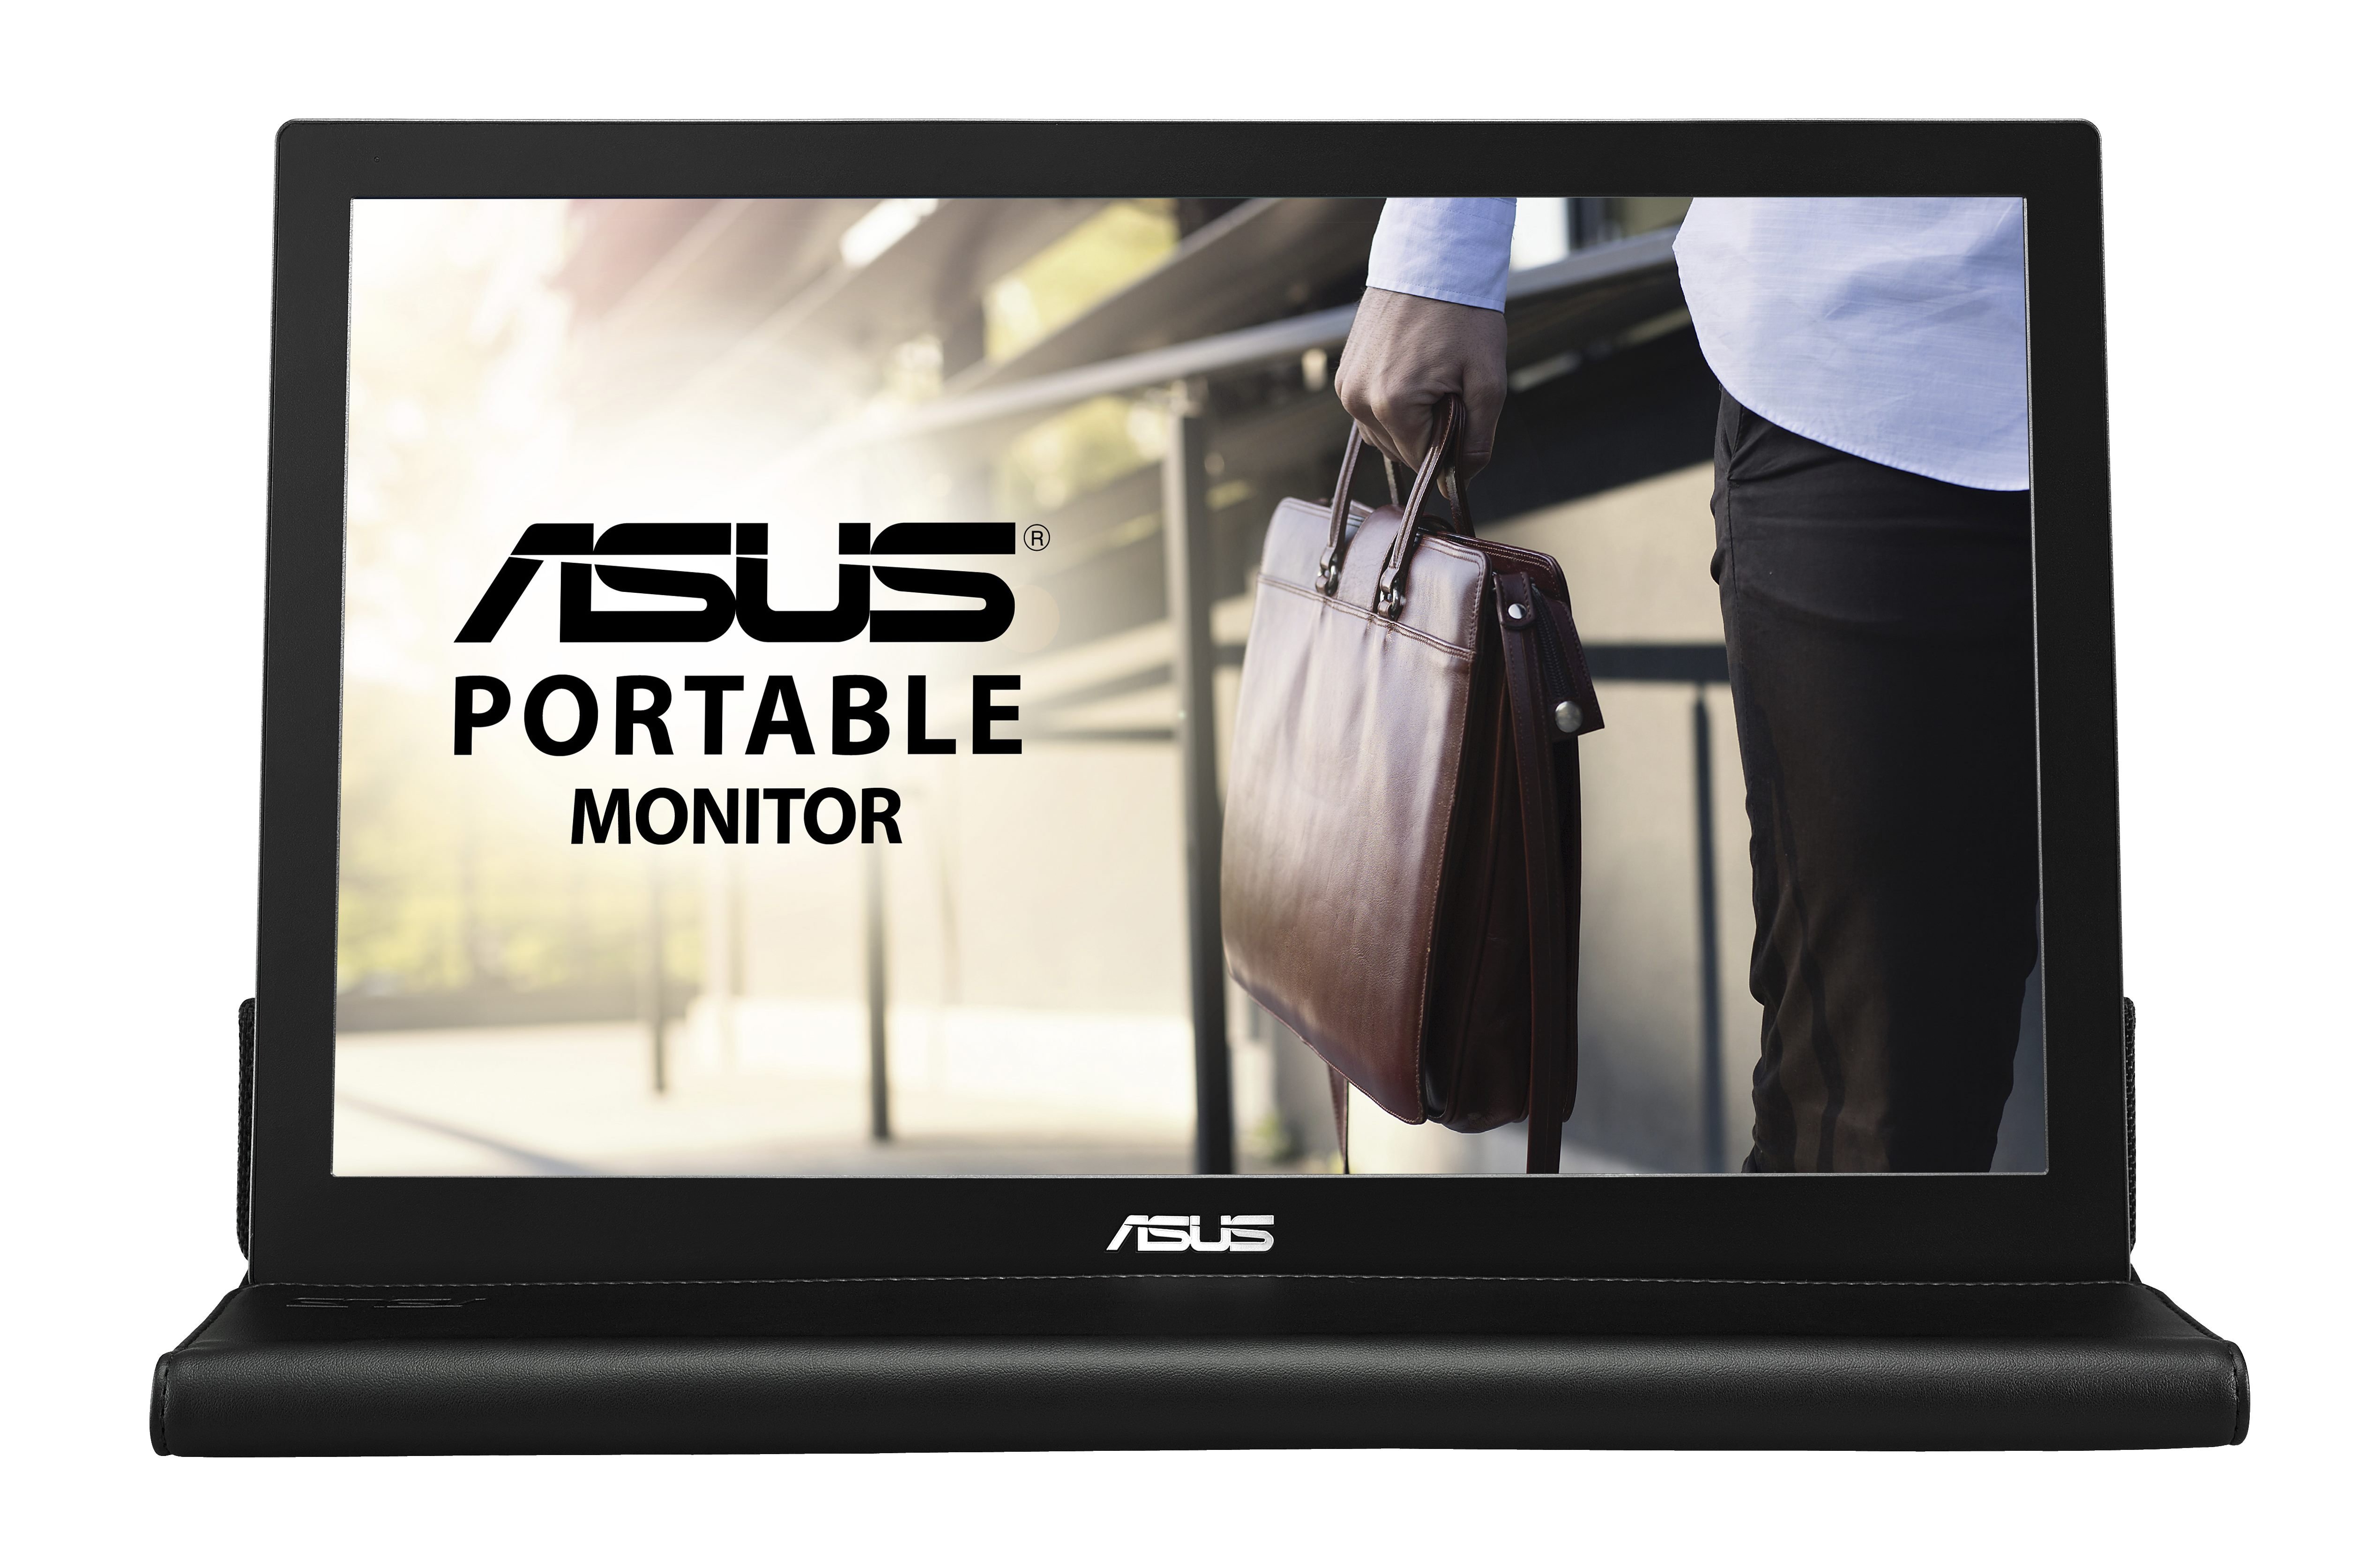 ASUS MB168B 15.6in Portable USB Monitor Review